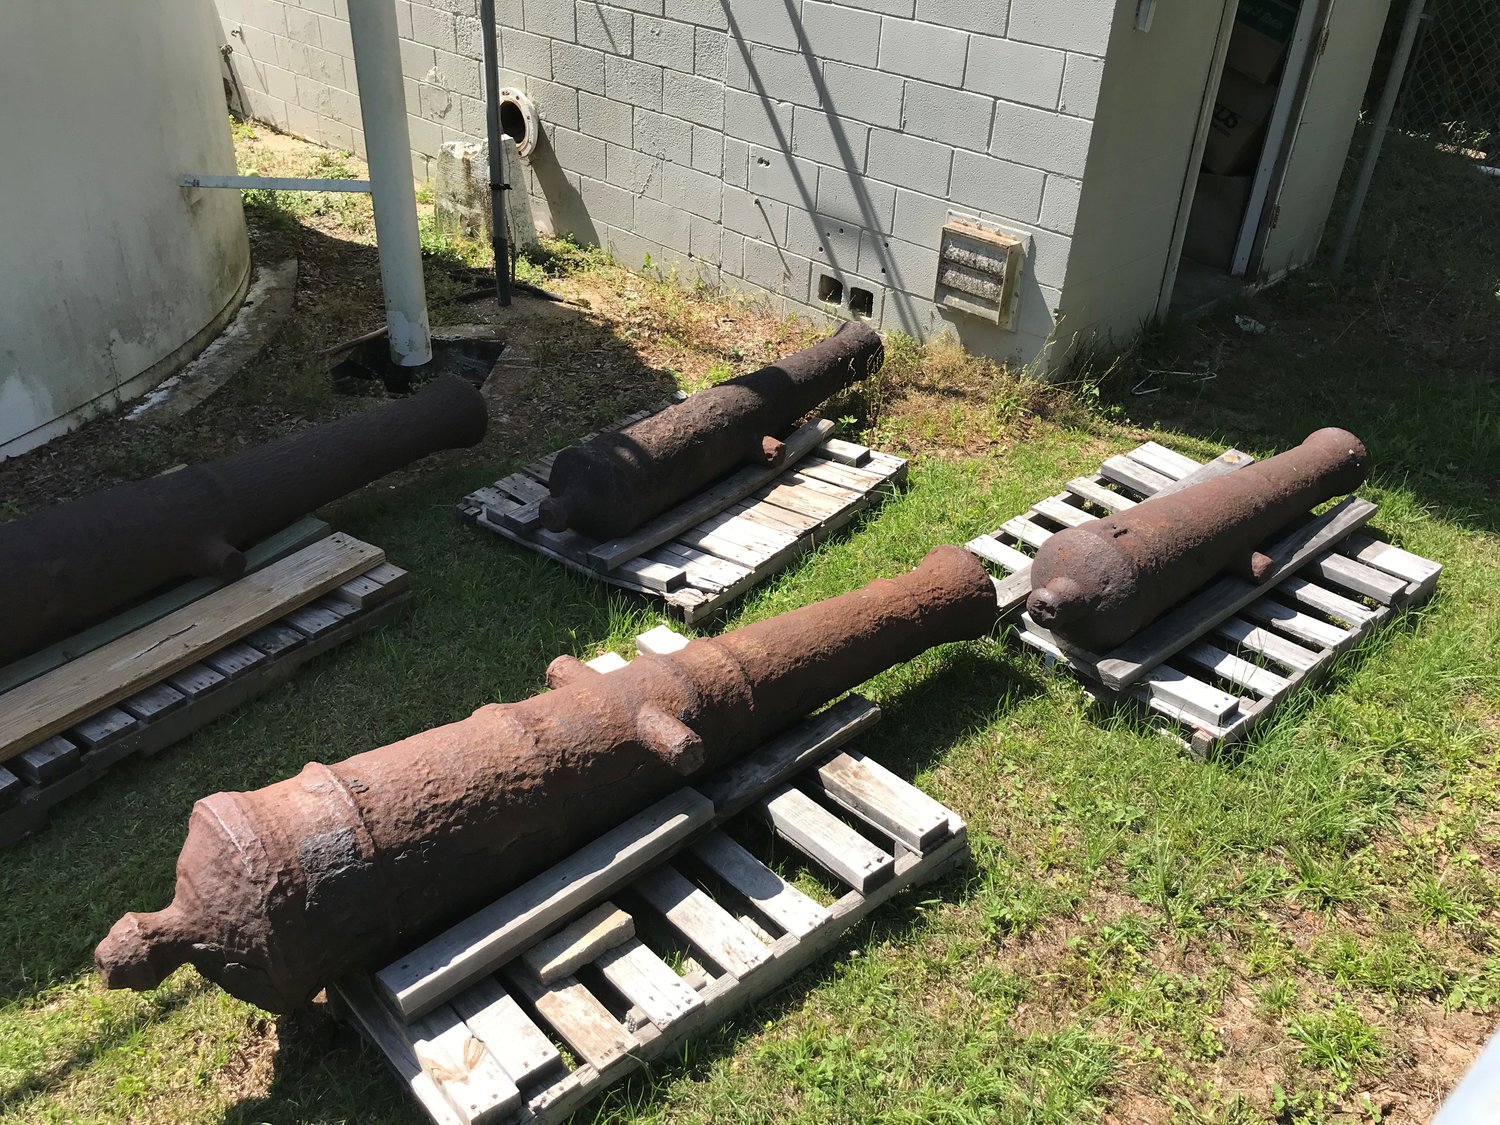 Four cannons found in Jamaica have been presented to Spanish Fort and will be put on display at City Hall.